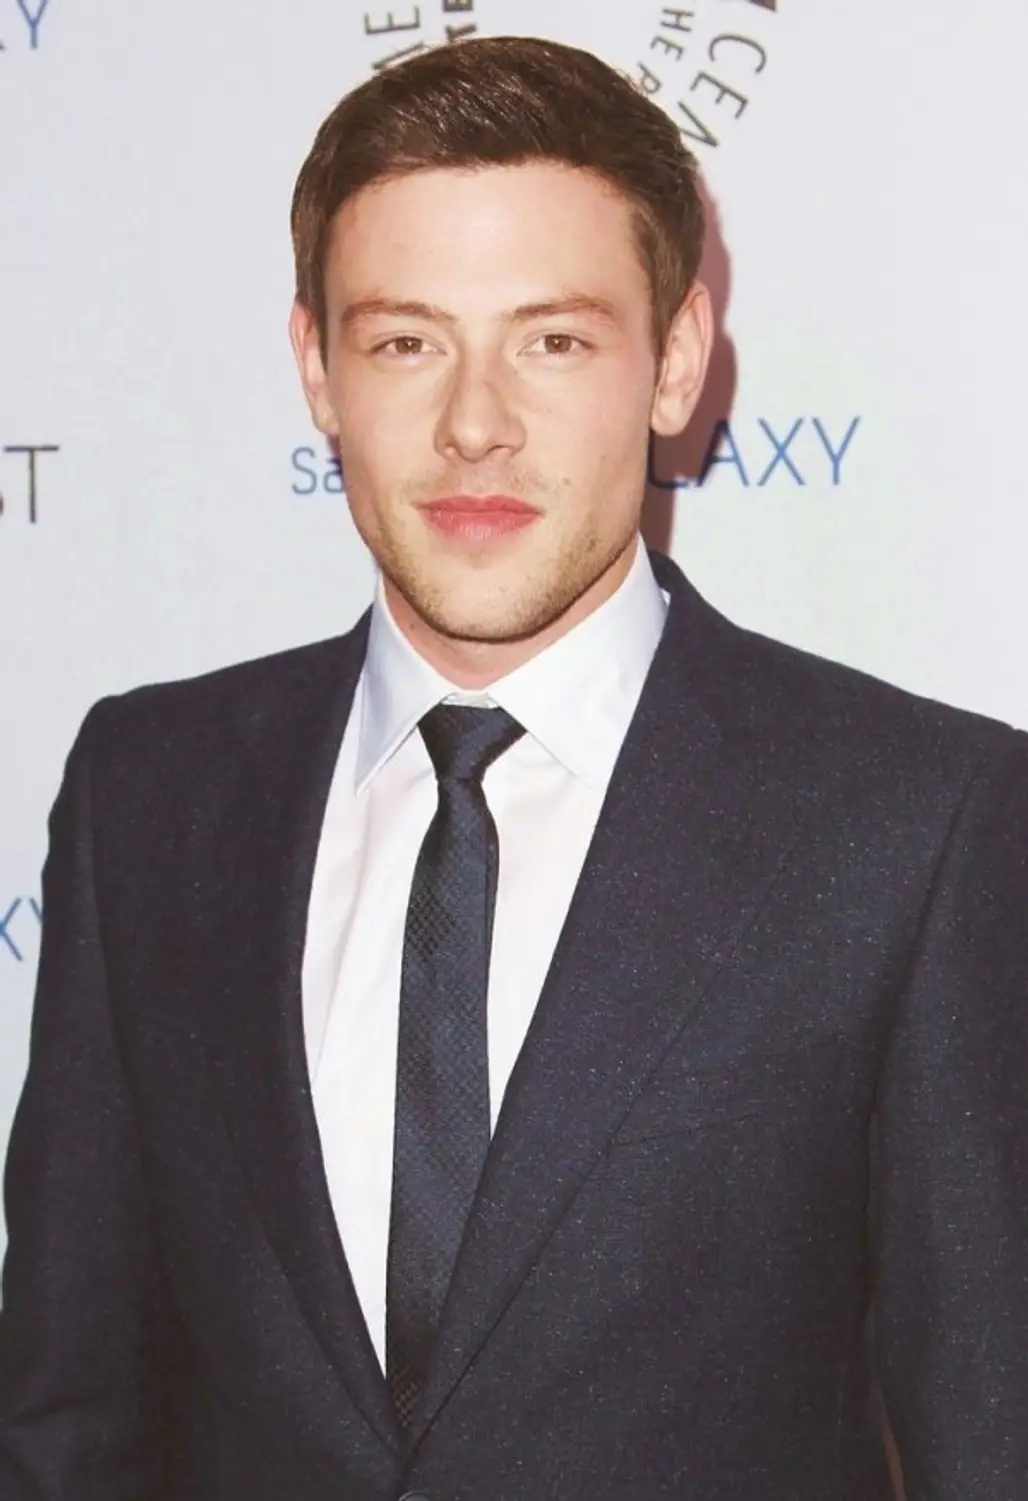 Cory Monteith’s Death